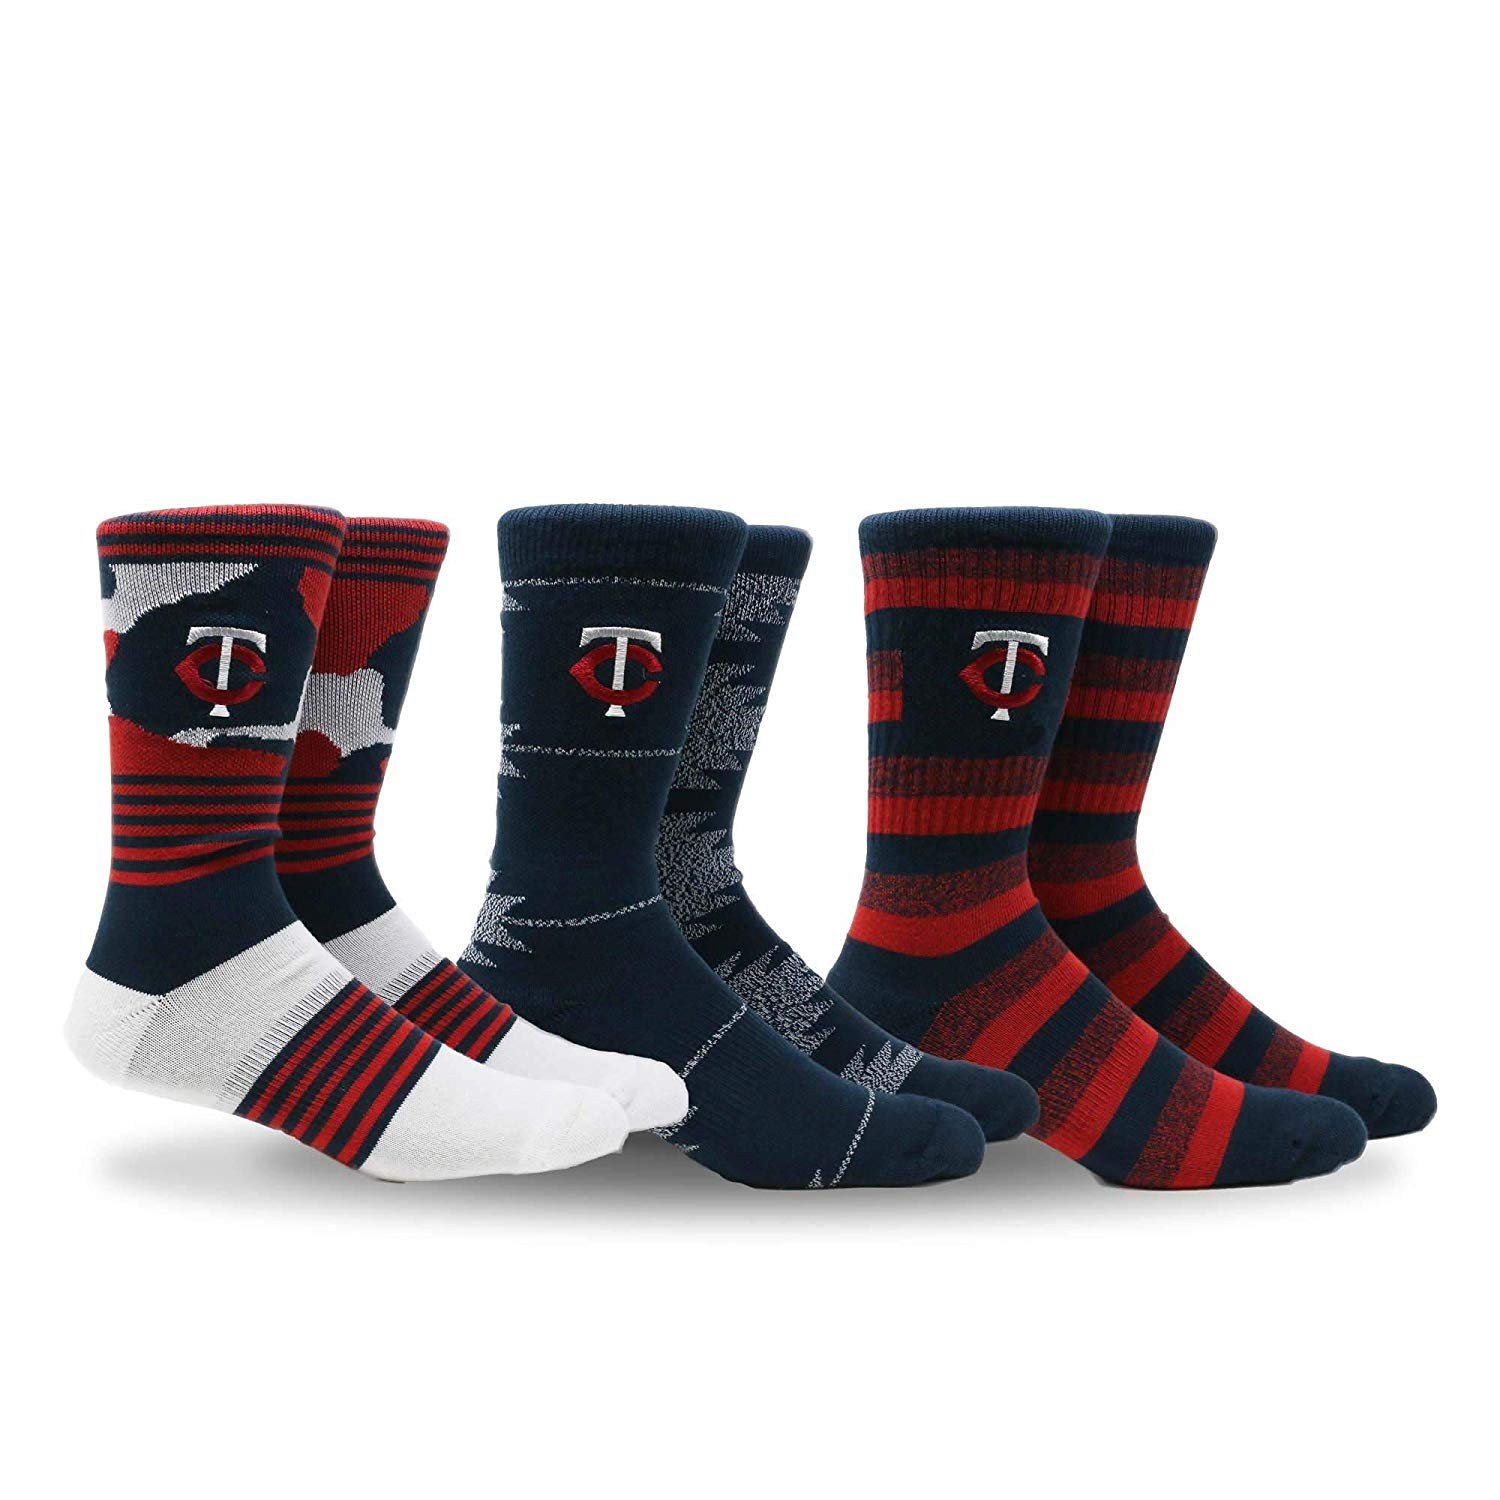 PKWY by Stance MLB Men's Clubhouse Collection 3-Pack Socks | eBay